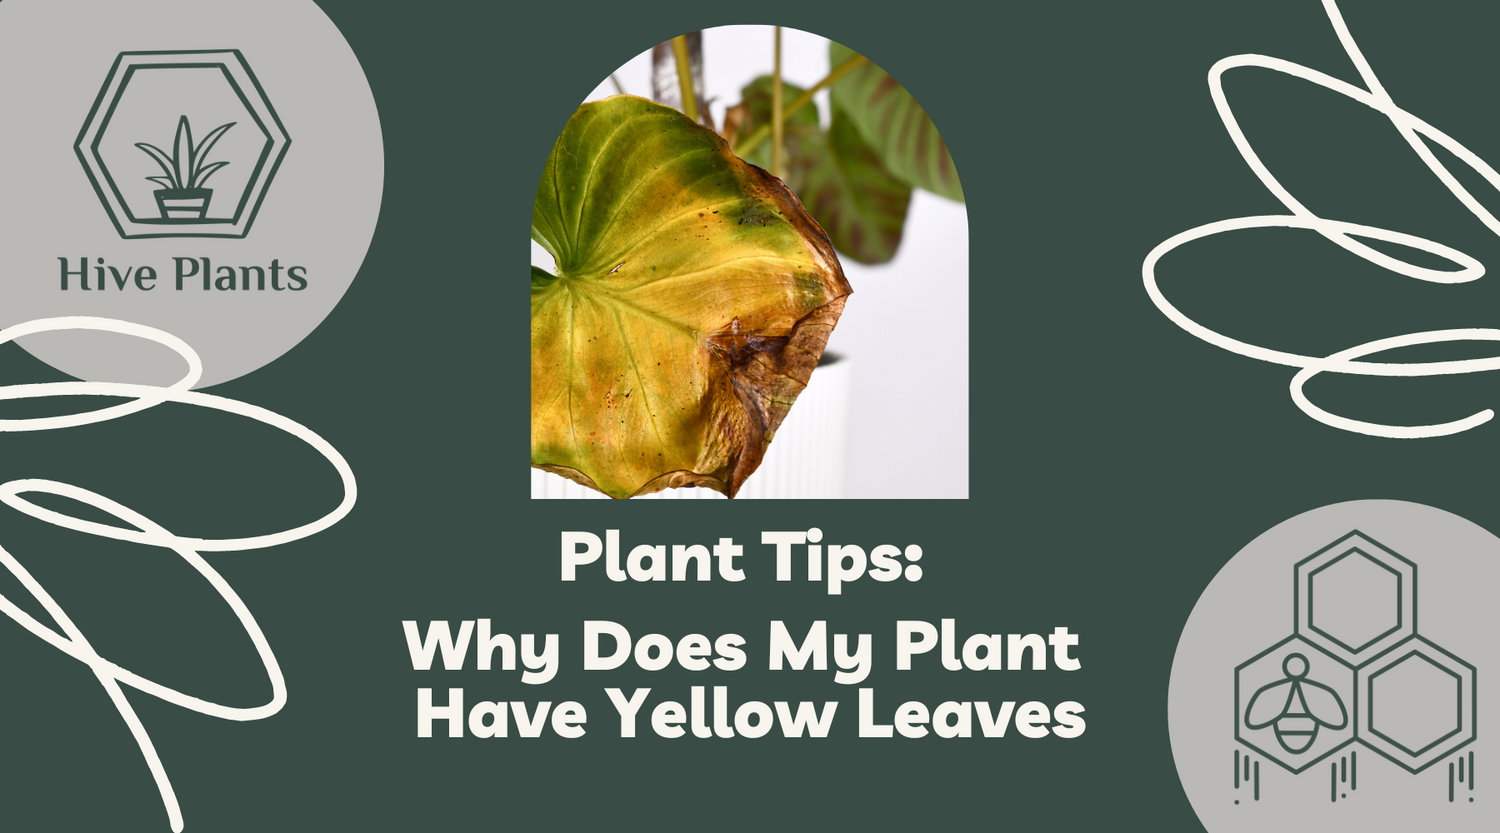 Why Does My Plant Have Yellow Leaves?